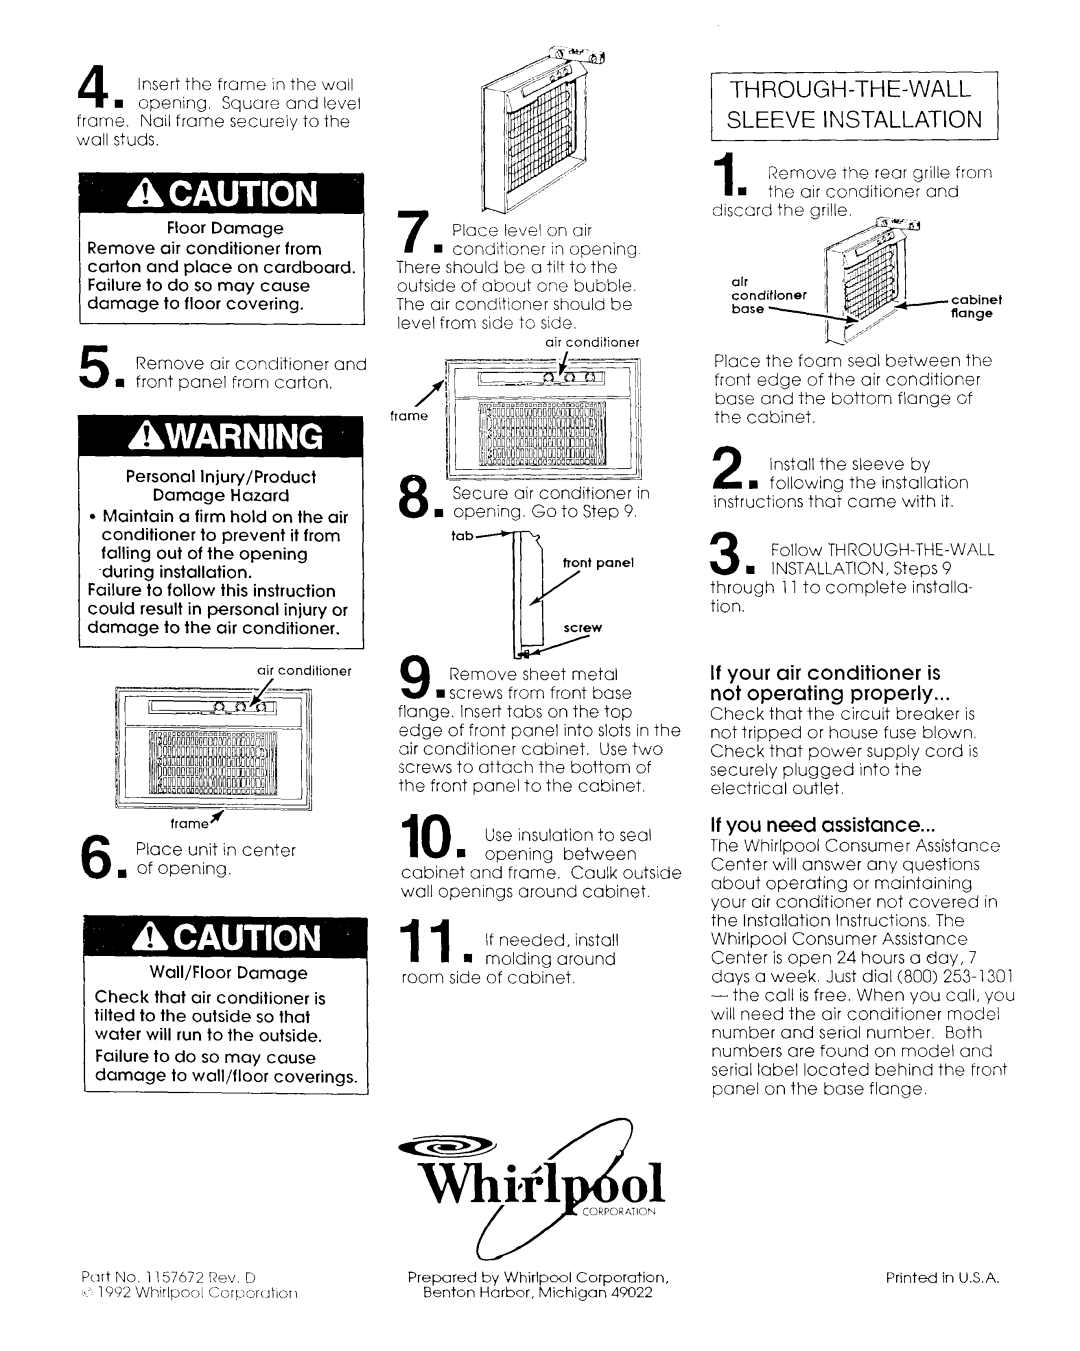 Whirlpool 1157672 installation instructions If your air conditioner is not operating properly, If you need assistance 